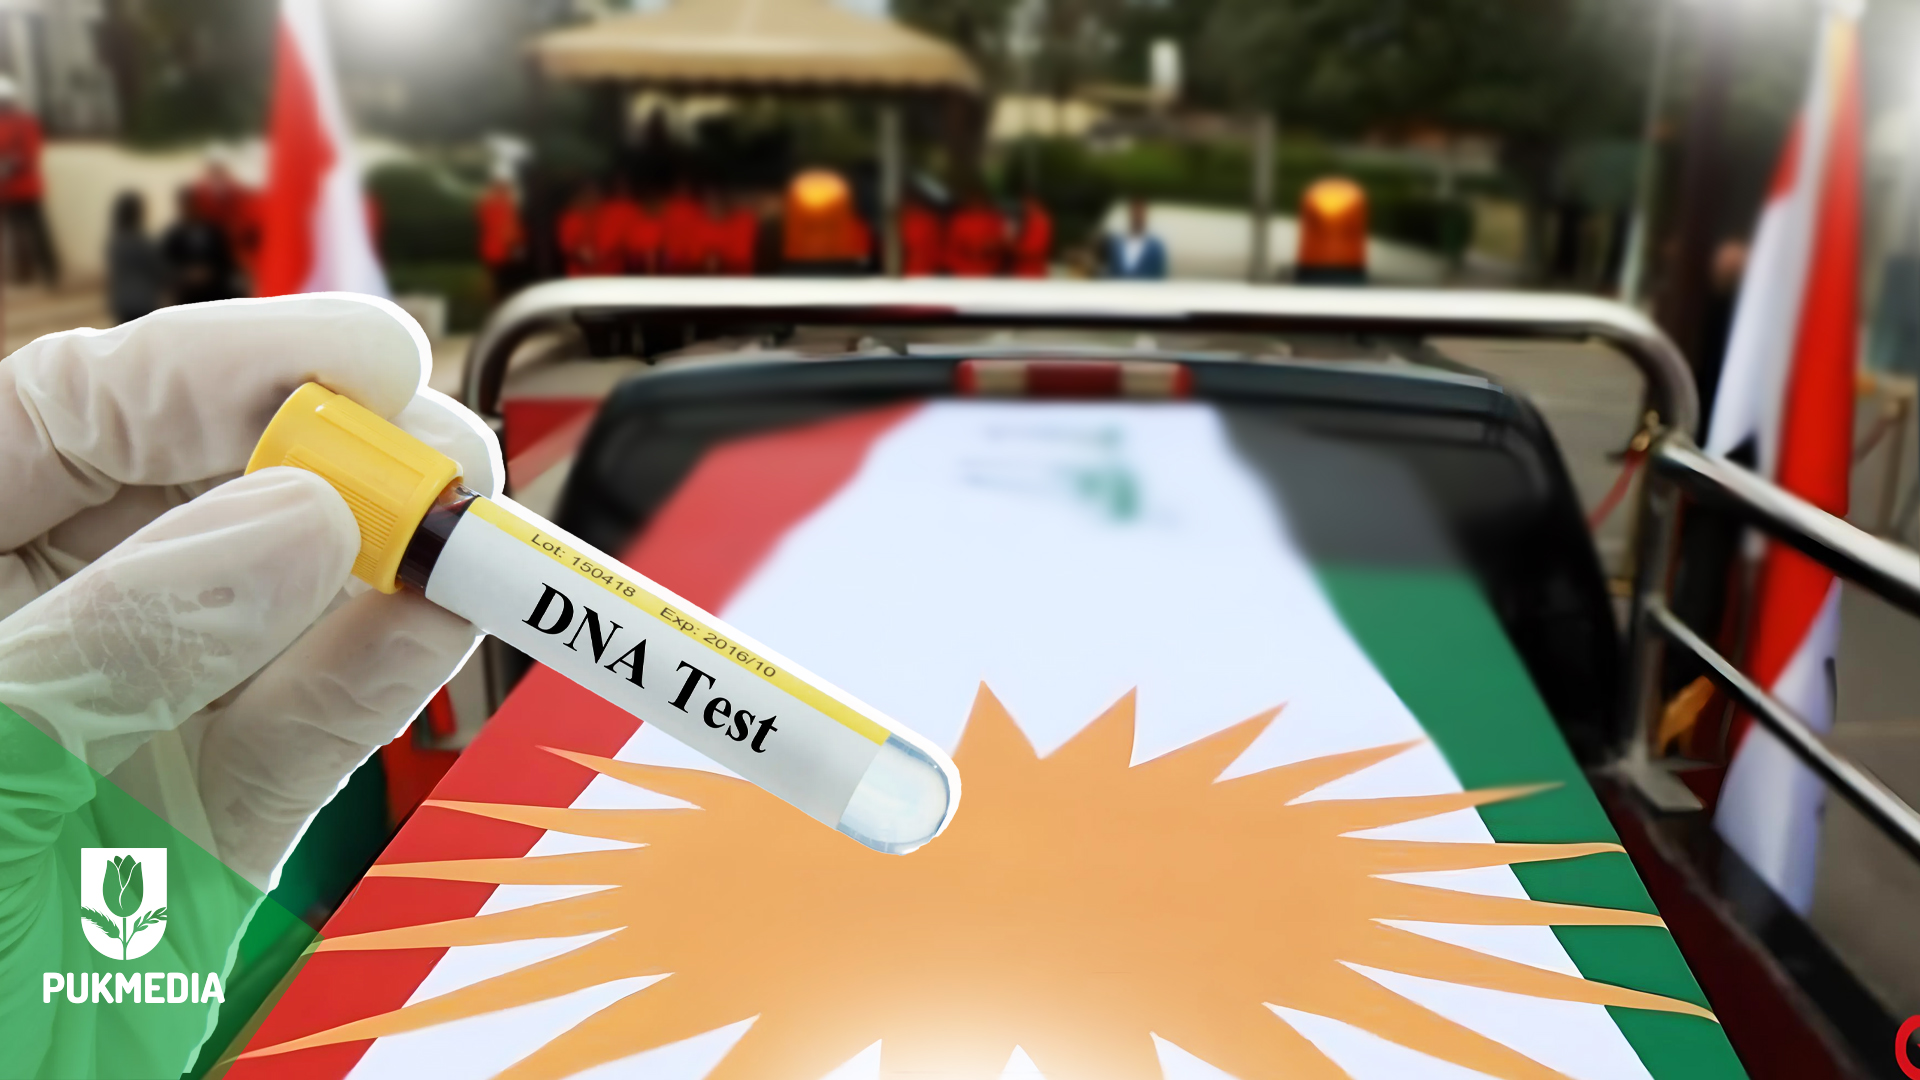  Blood sample and Kurdistan flag in the background.